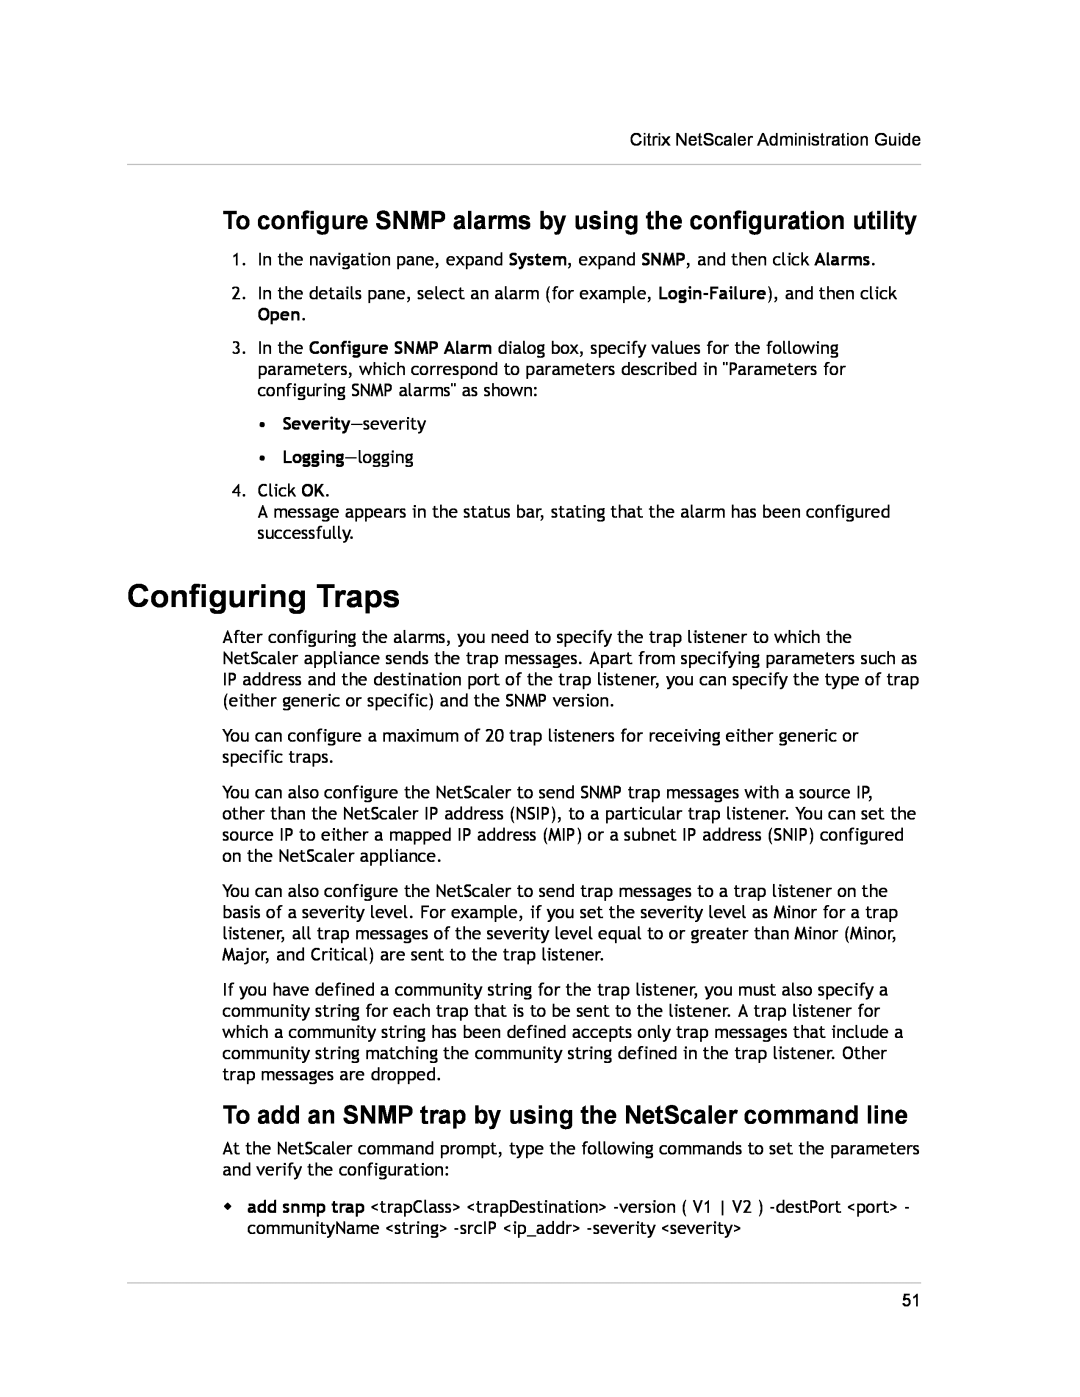 Citrix Systems CITRIX NETSCALER 9.3 manual Configuring Traps, To configure SNMP alarms by using the configuration utility 